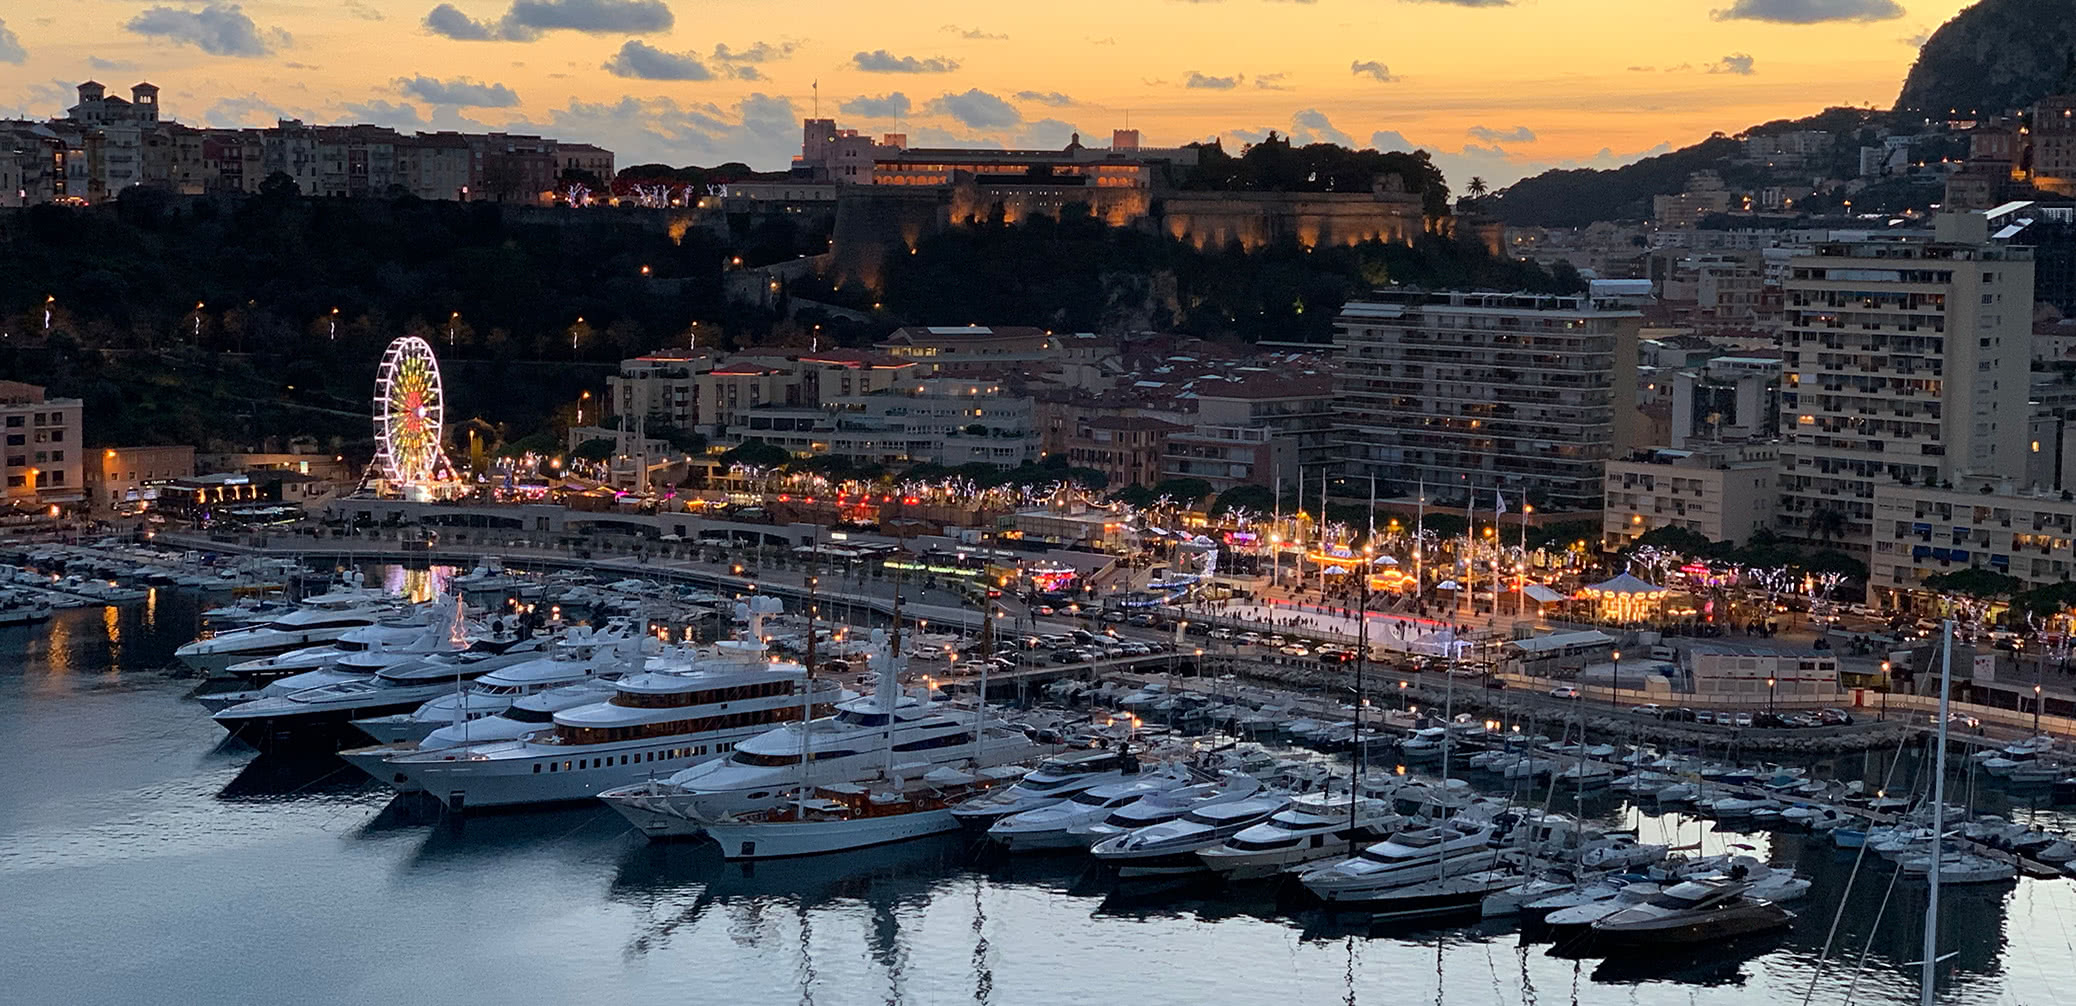 Is There A Four Seasons In Monte Carlo, Monaco?